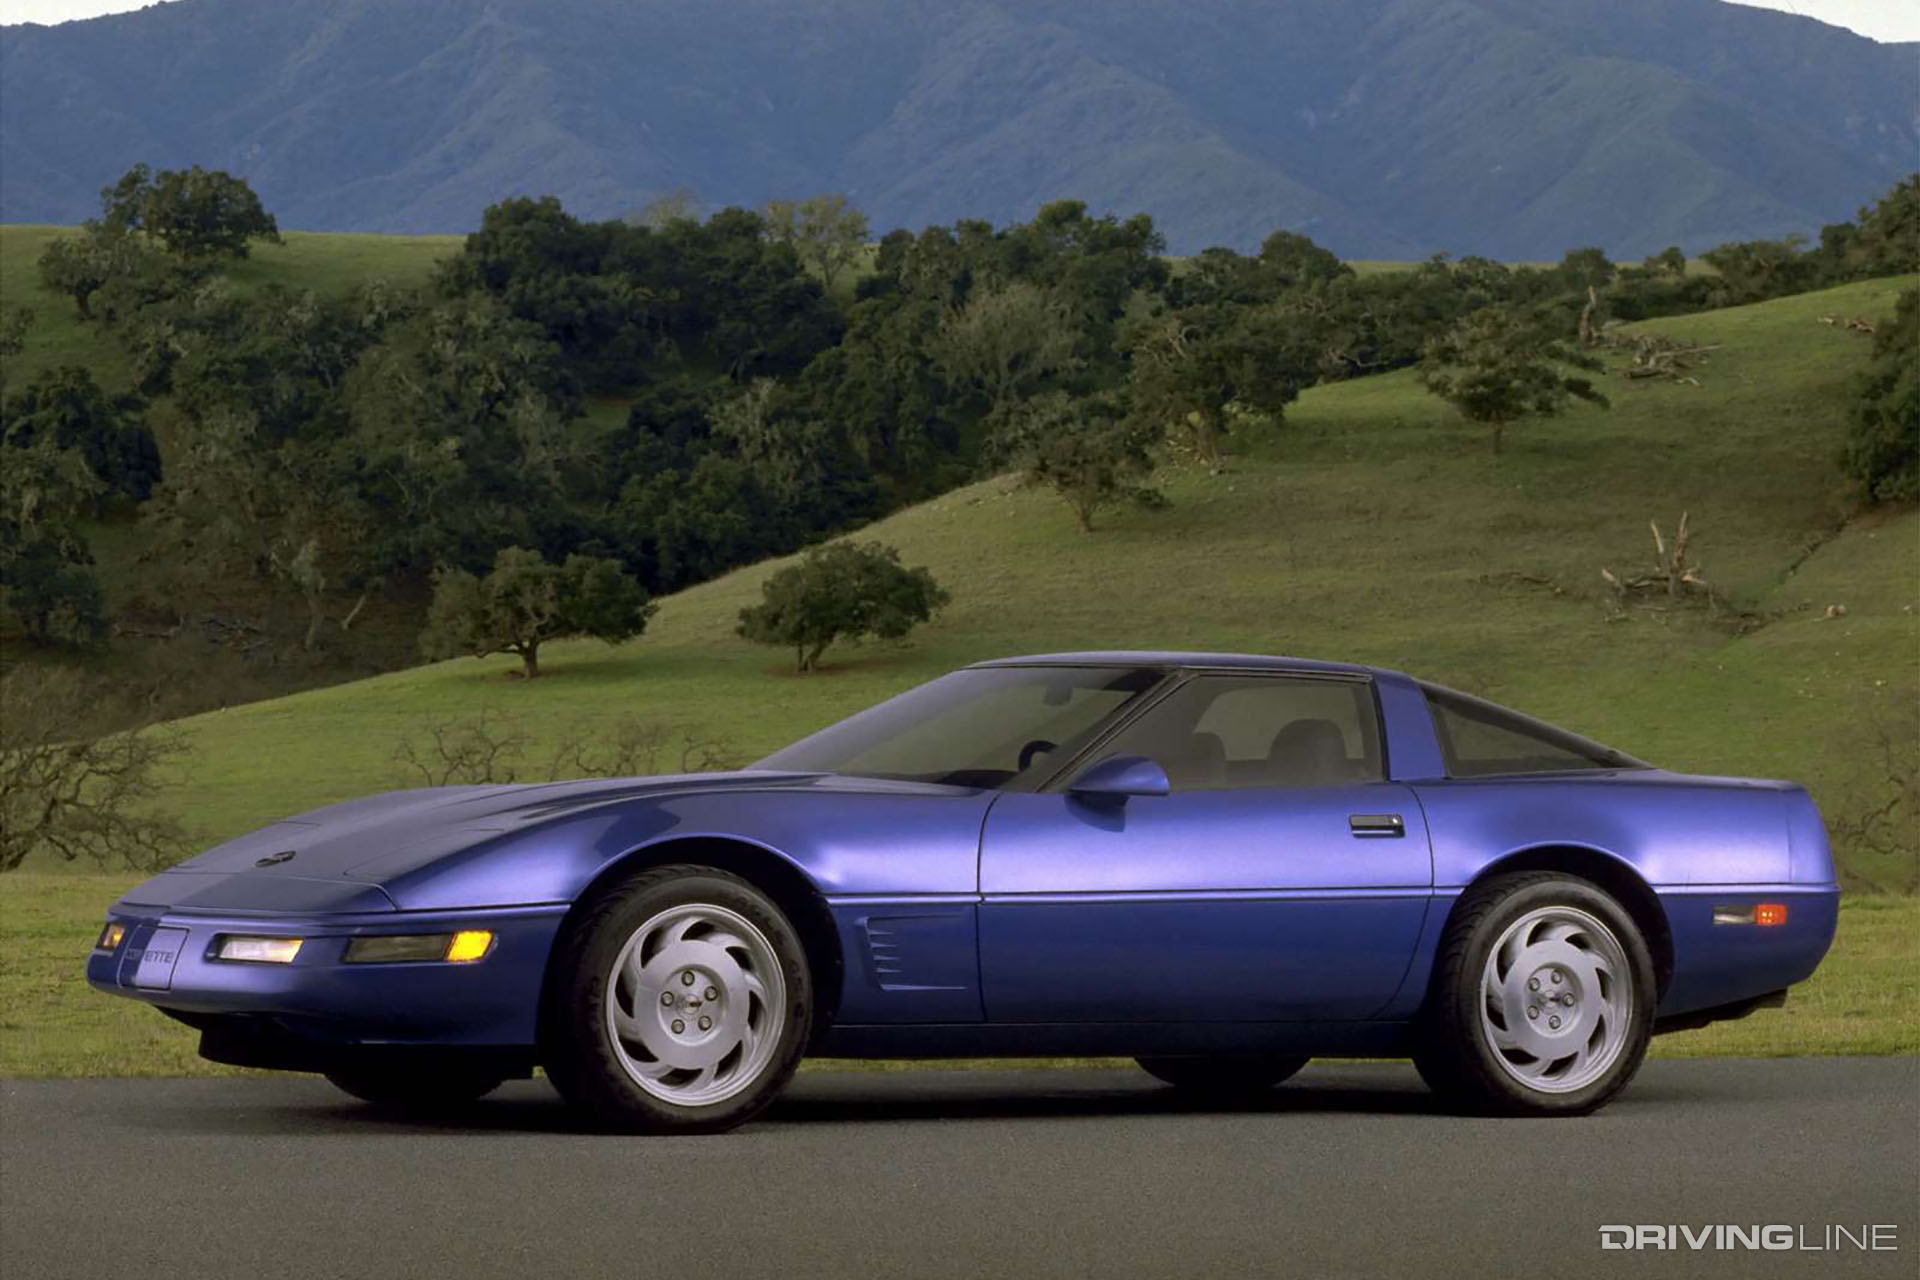 The C4 Corvette as a Project Car: Build it or Forget it?